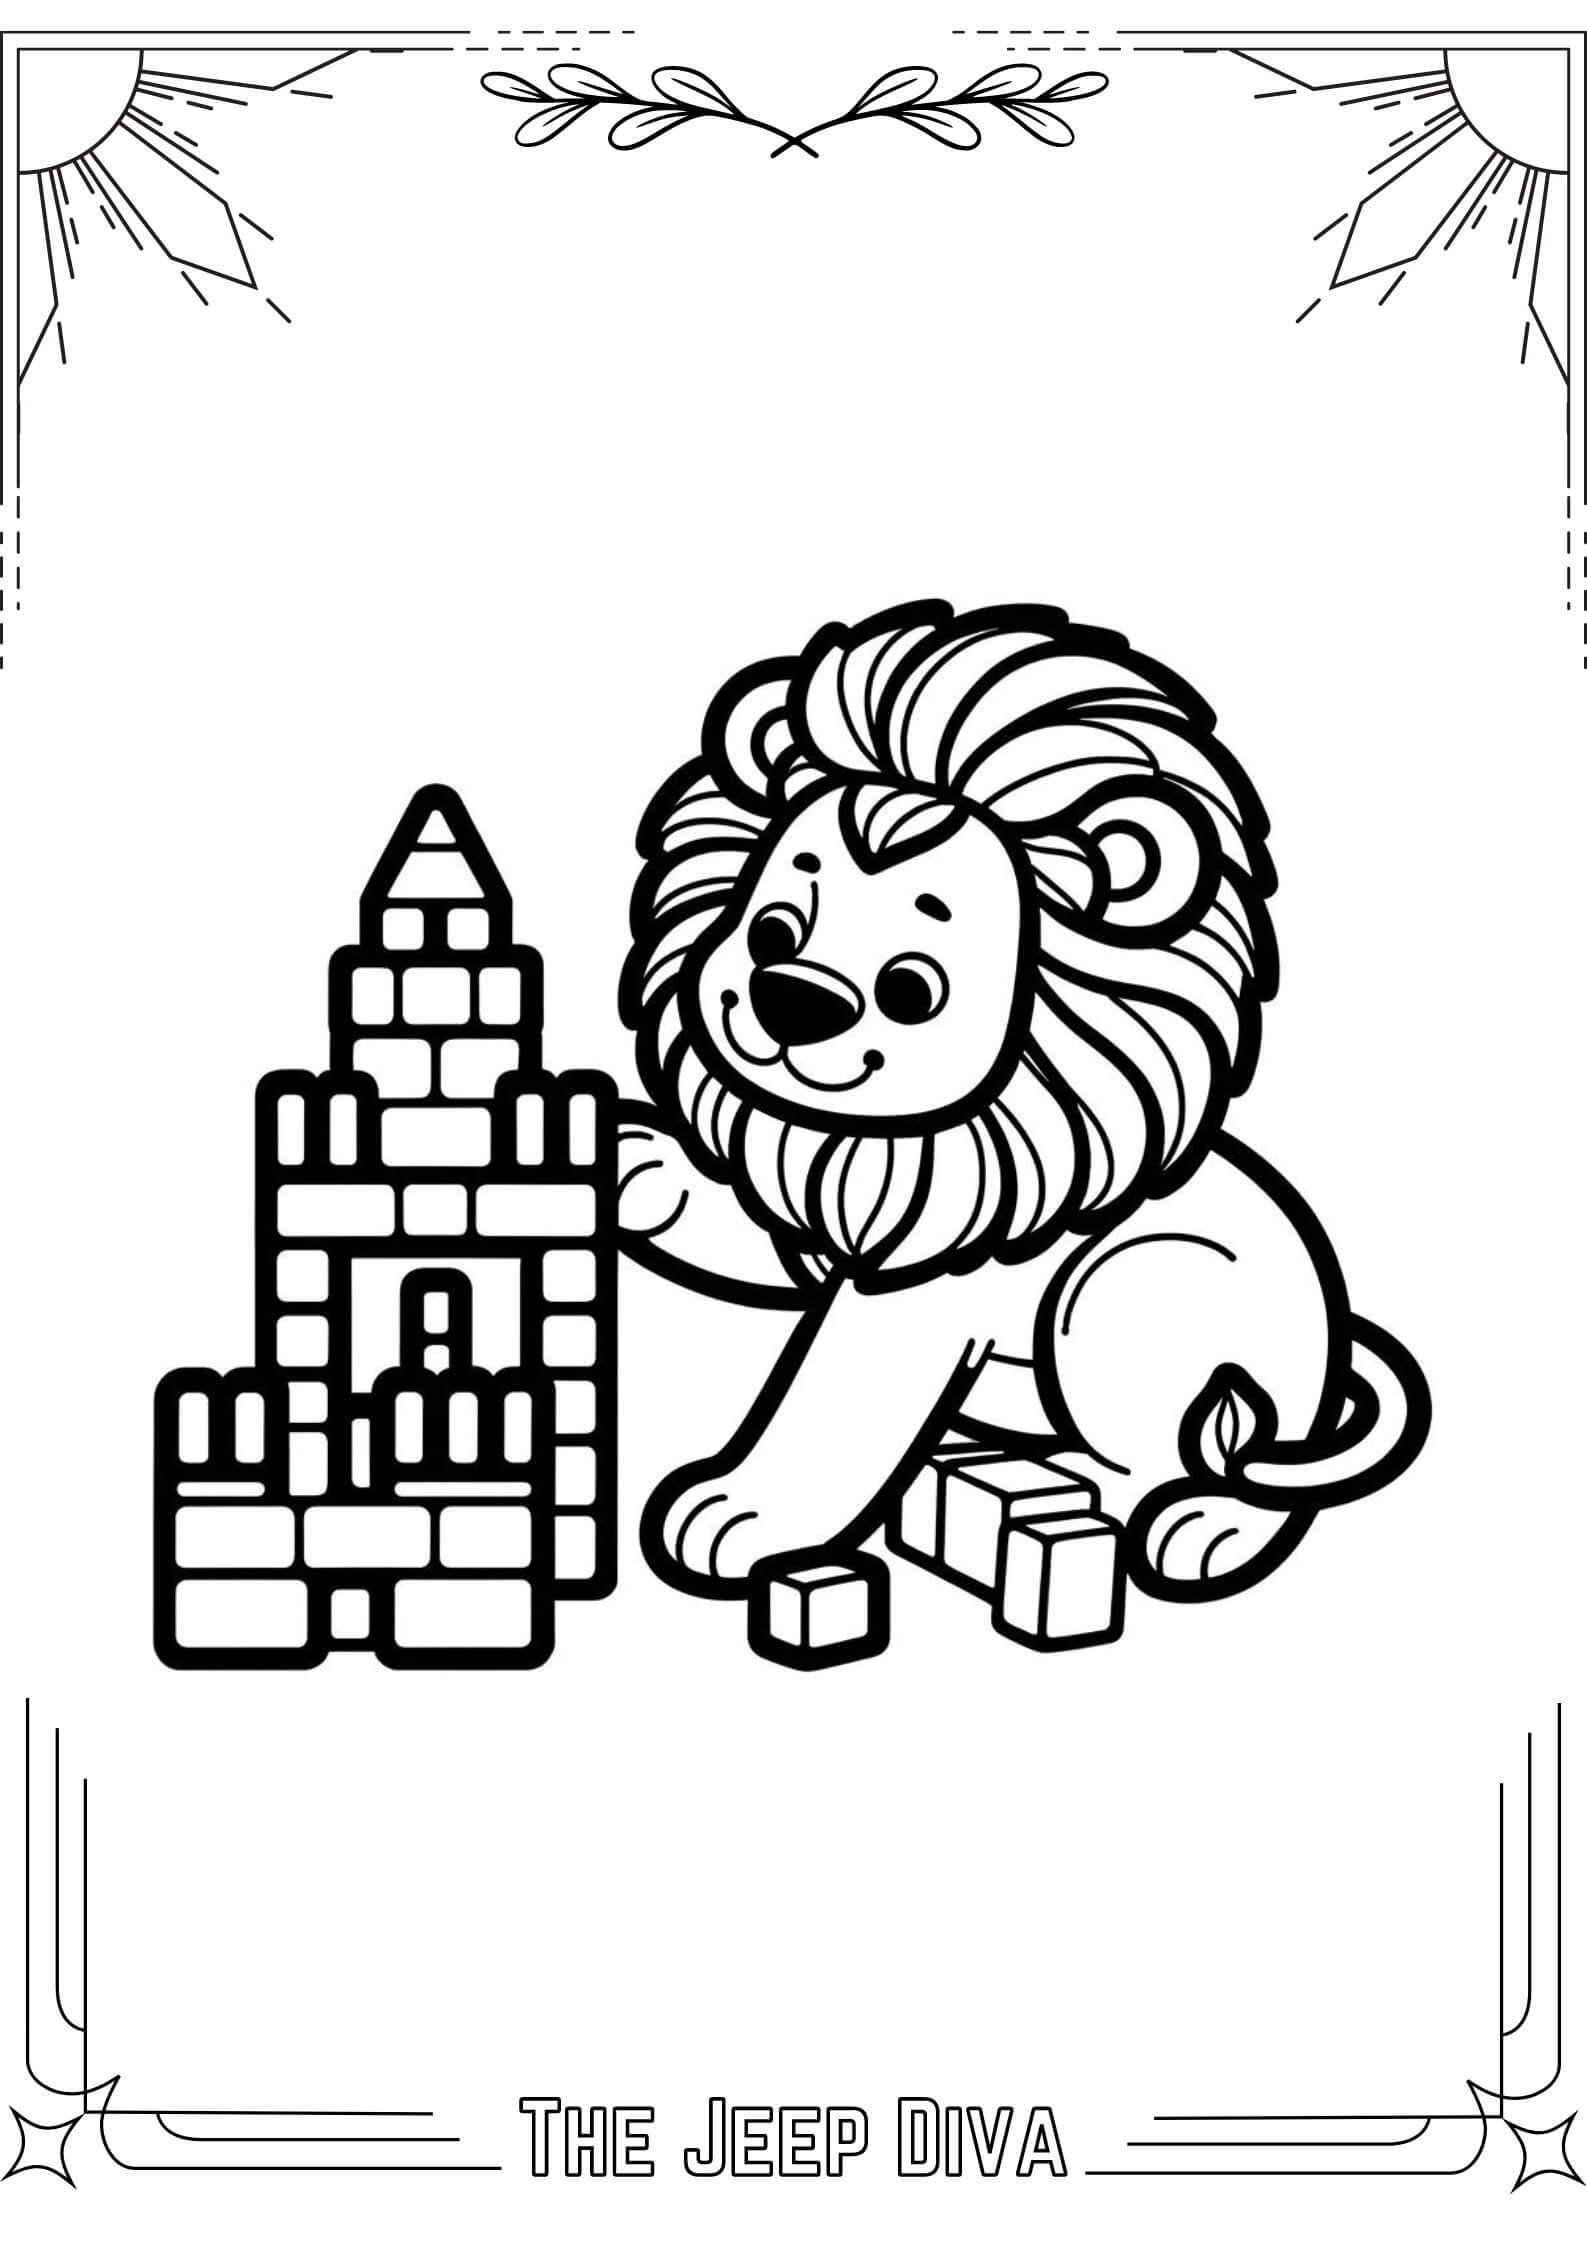 The Jeep Diva Coloring Page Lion Medium Difficulty 19